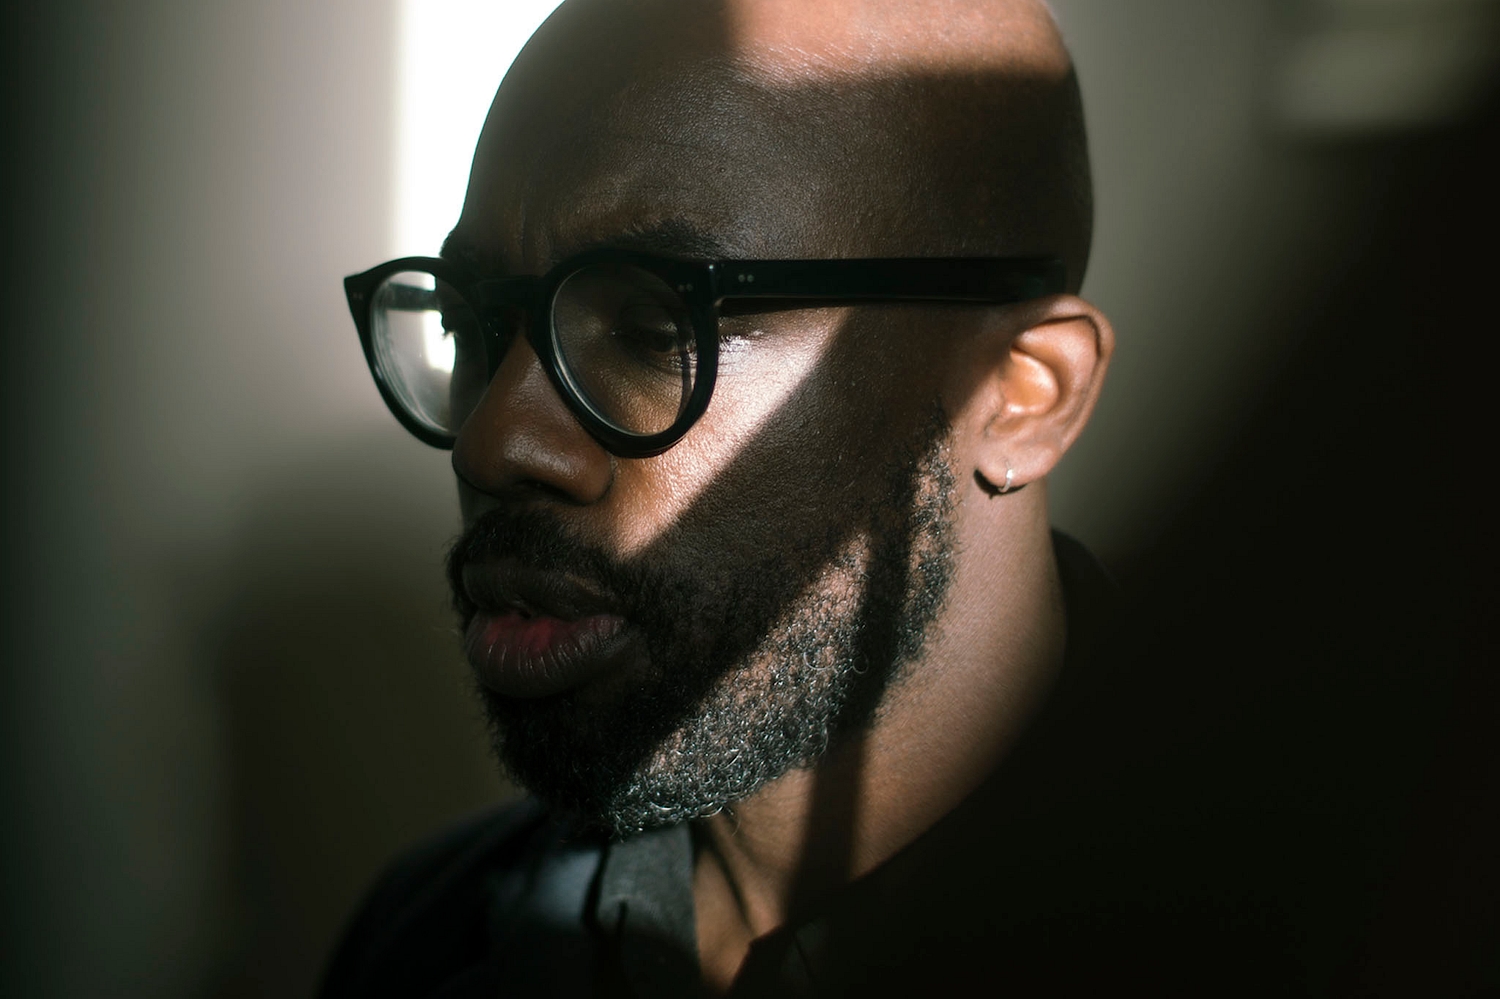 Ghostpoet sheds his skin: “It’s definitely much more of an observational record”